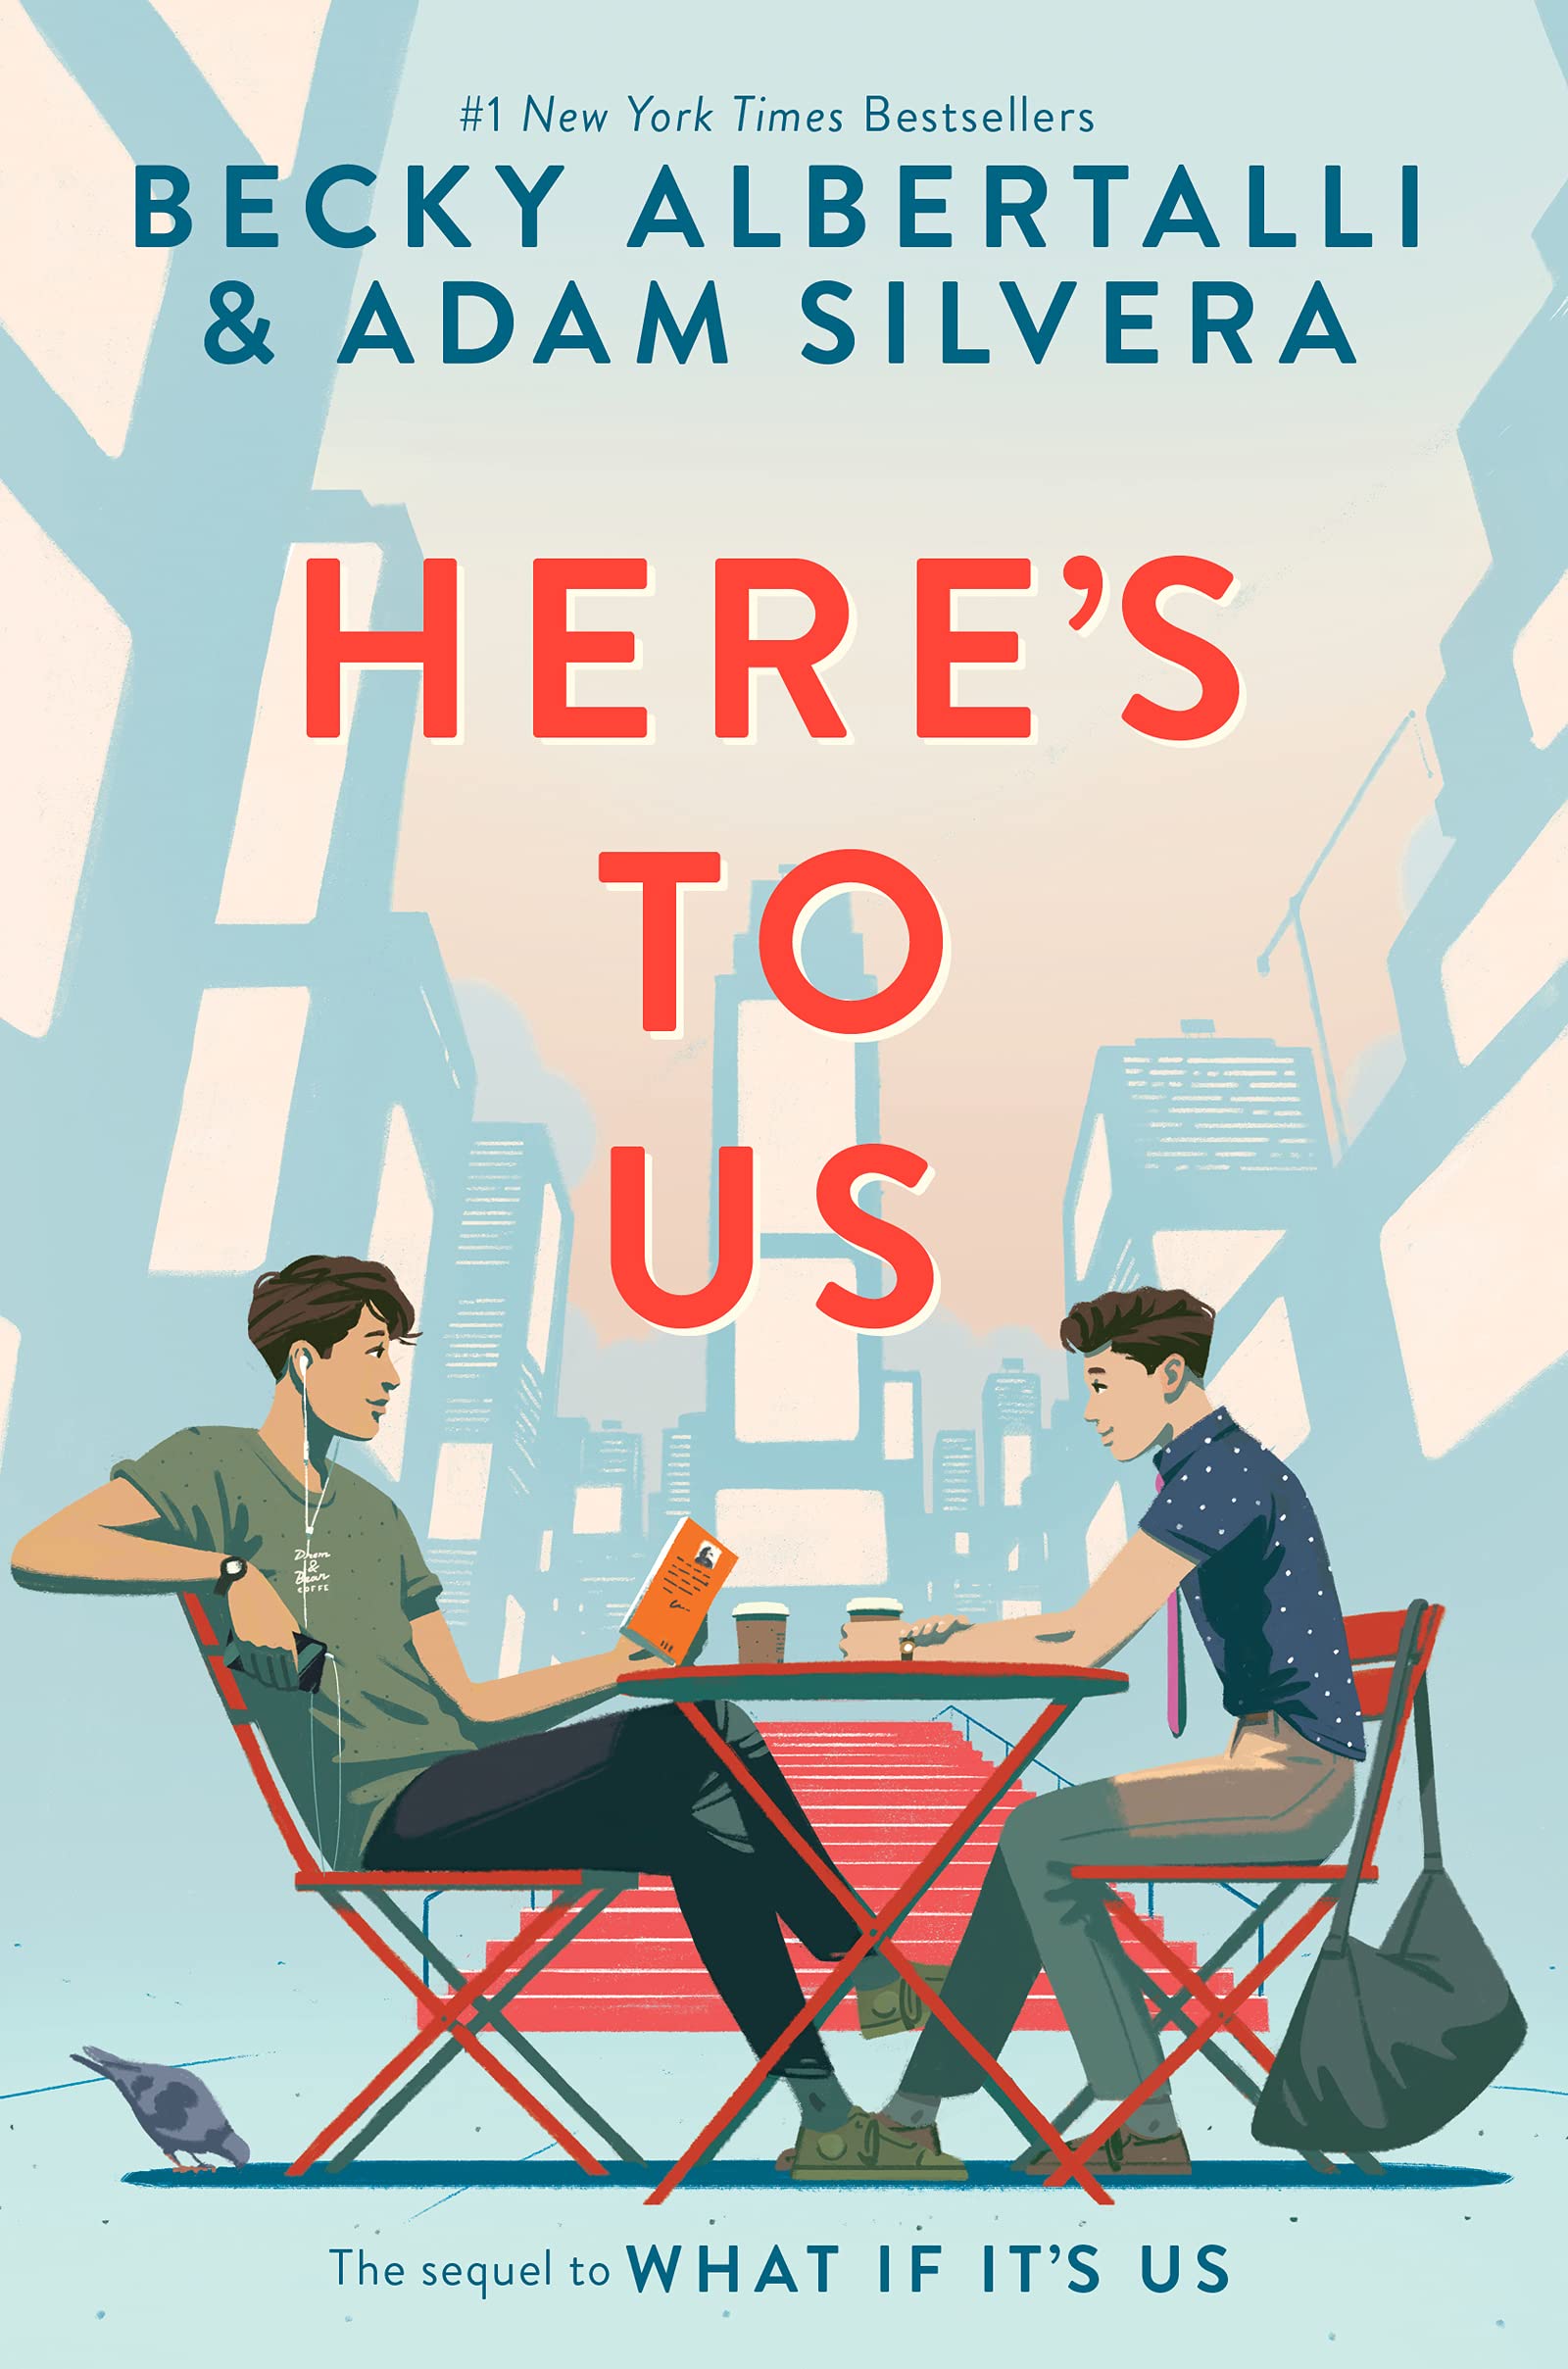 Cover of “Here’s to Us” by Becky Albertalli and Adam Silvera